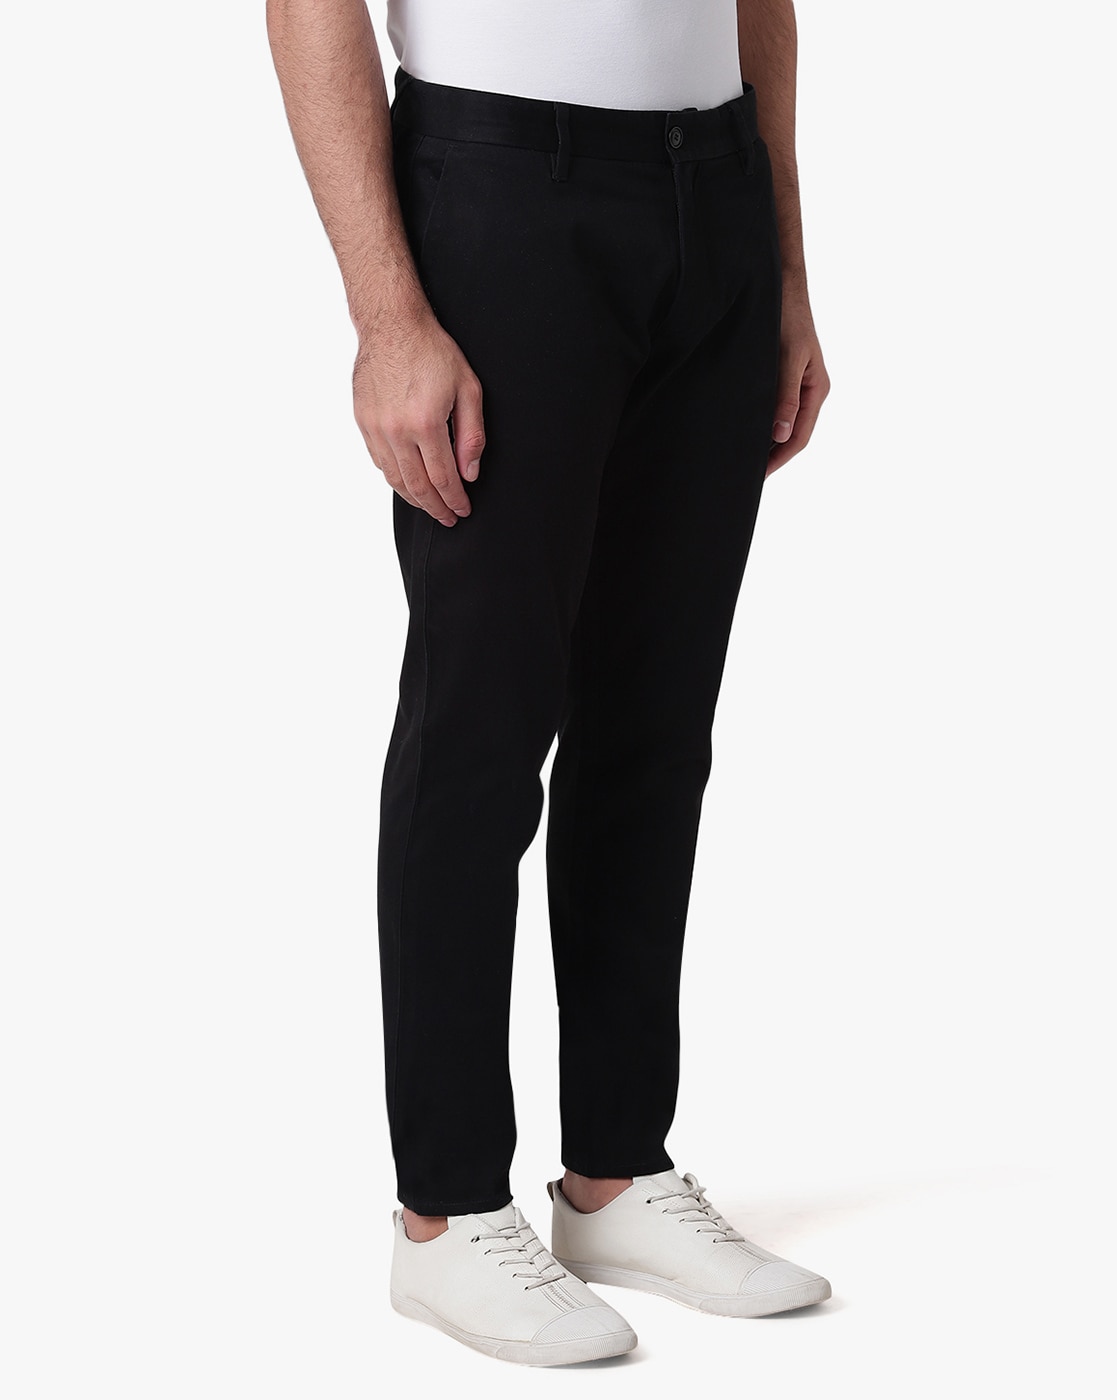 Buy EMPORIO ARMANI Relaxed Fit FlatFront Trousers  Black Color Men  AJIO  LUXE